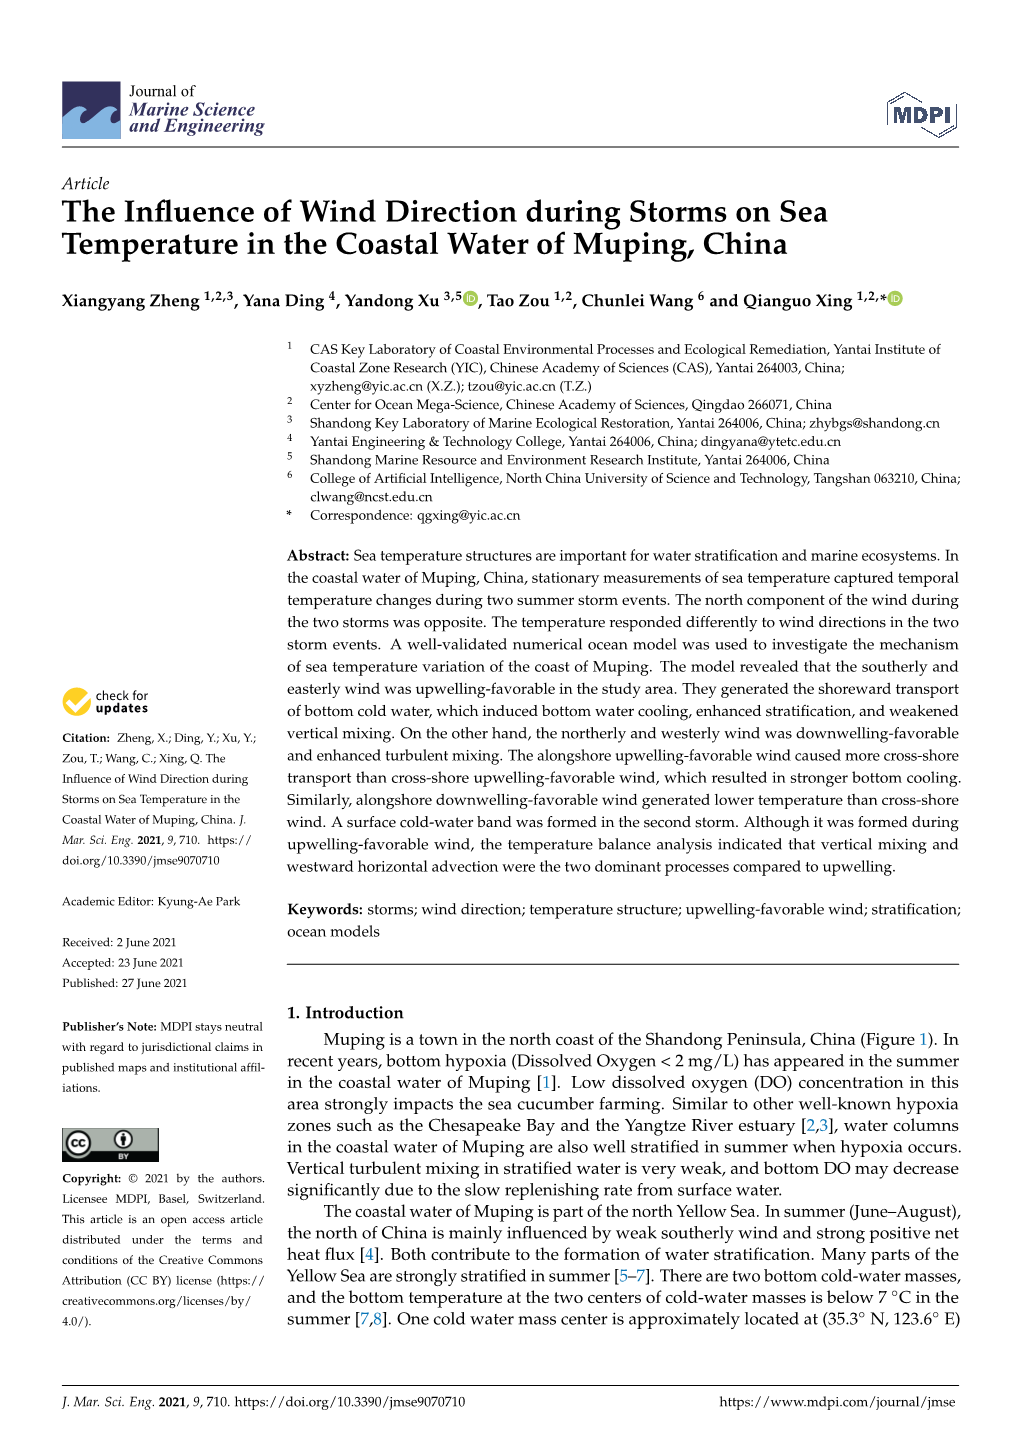 The Influence of Wind Direction During Storms on Sea Temperature in The